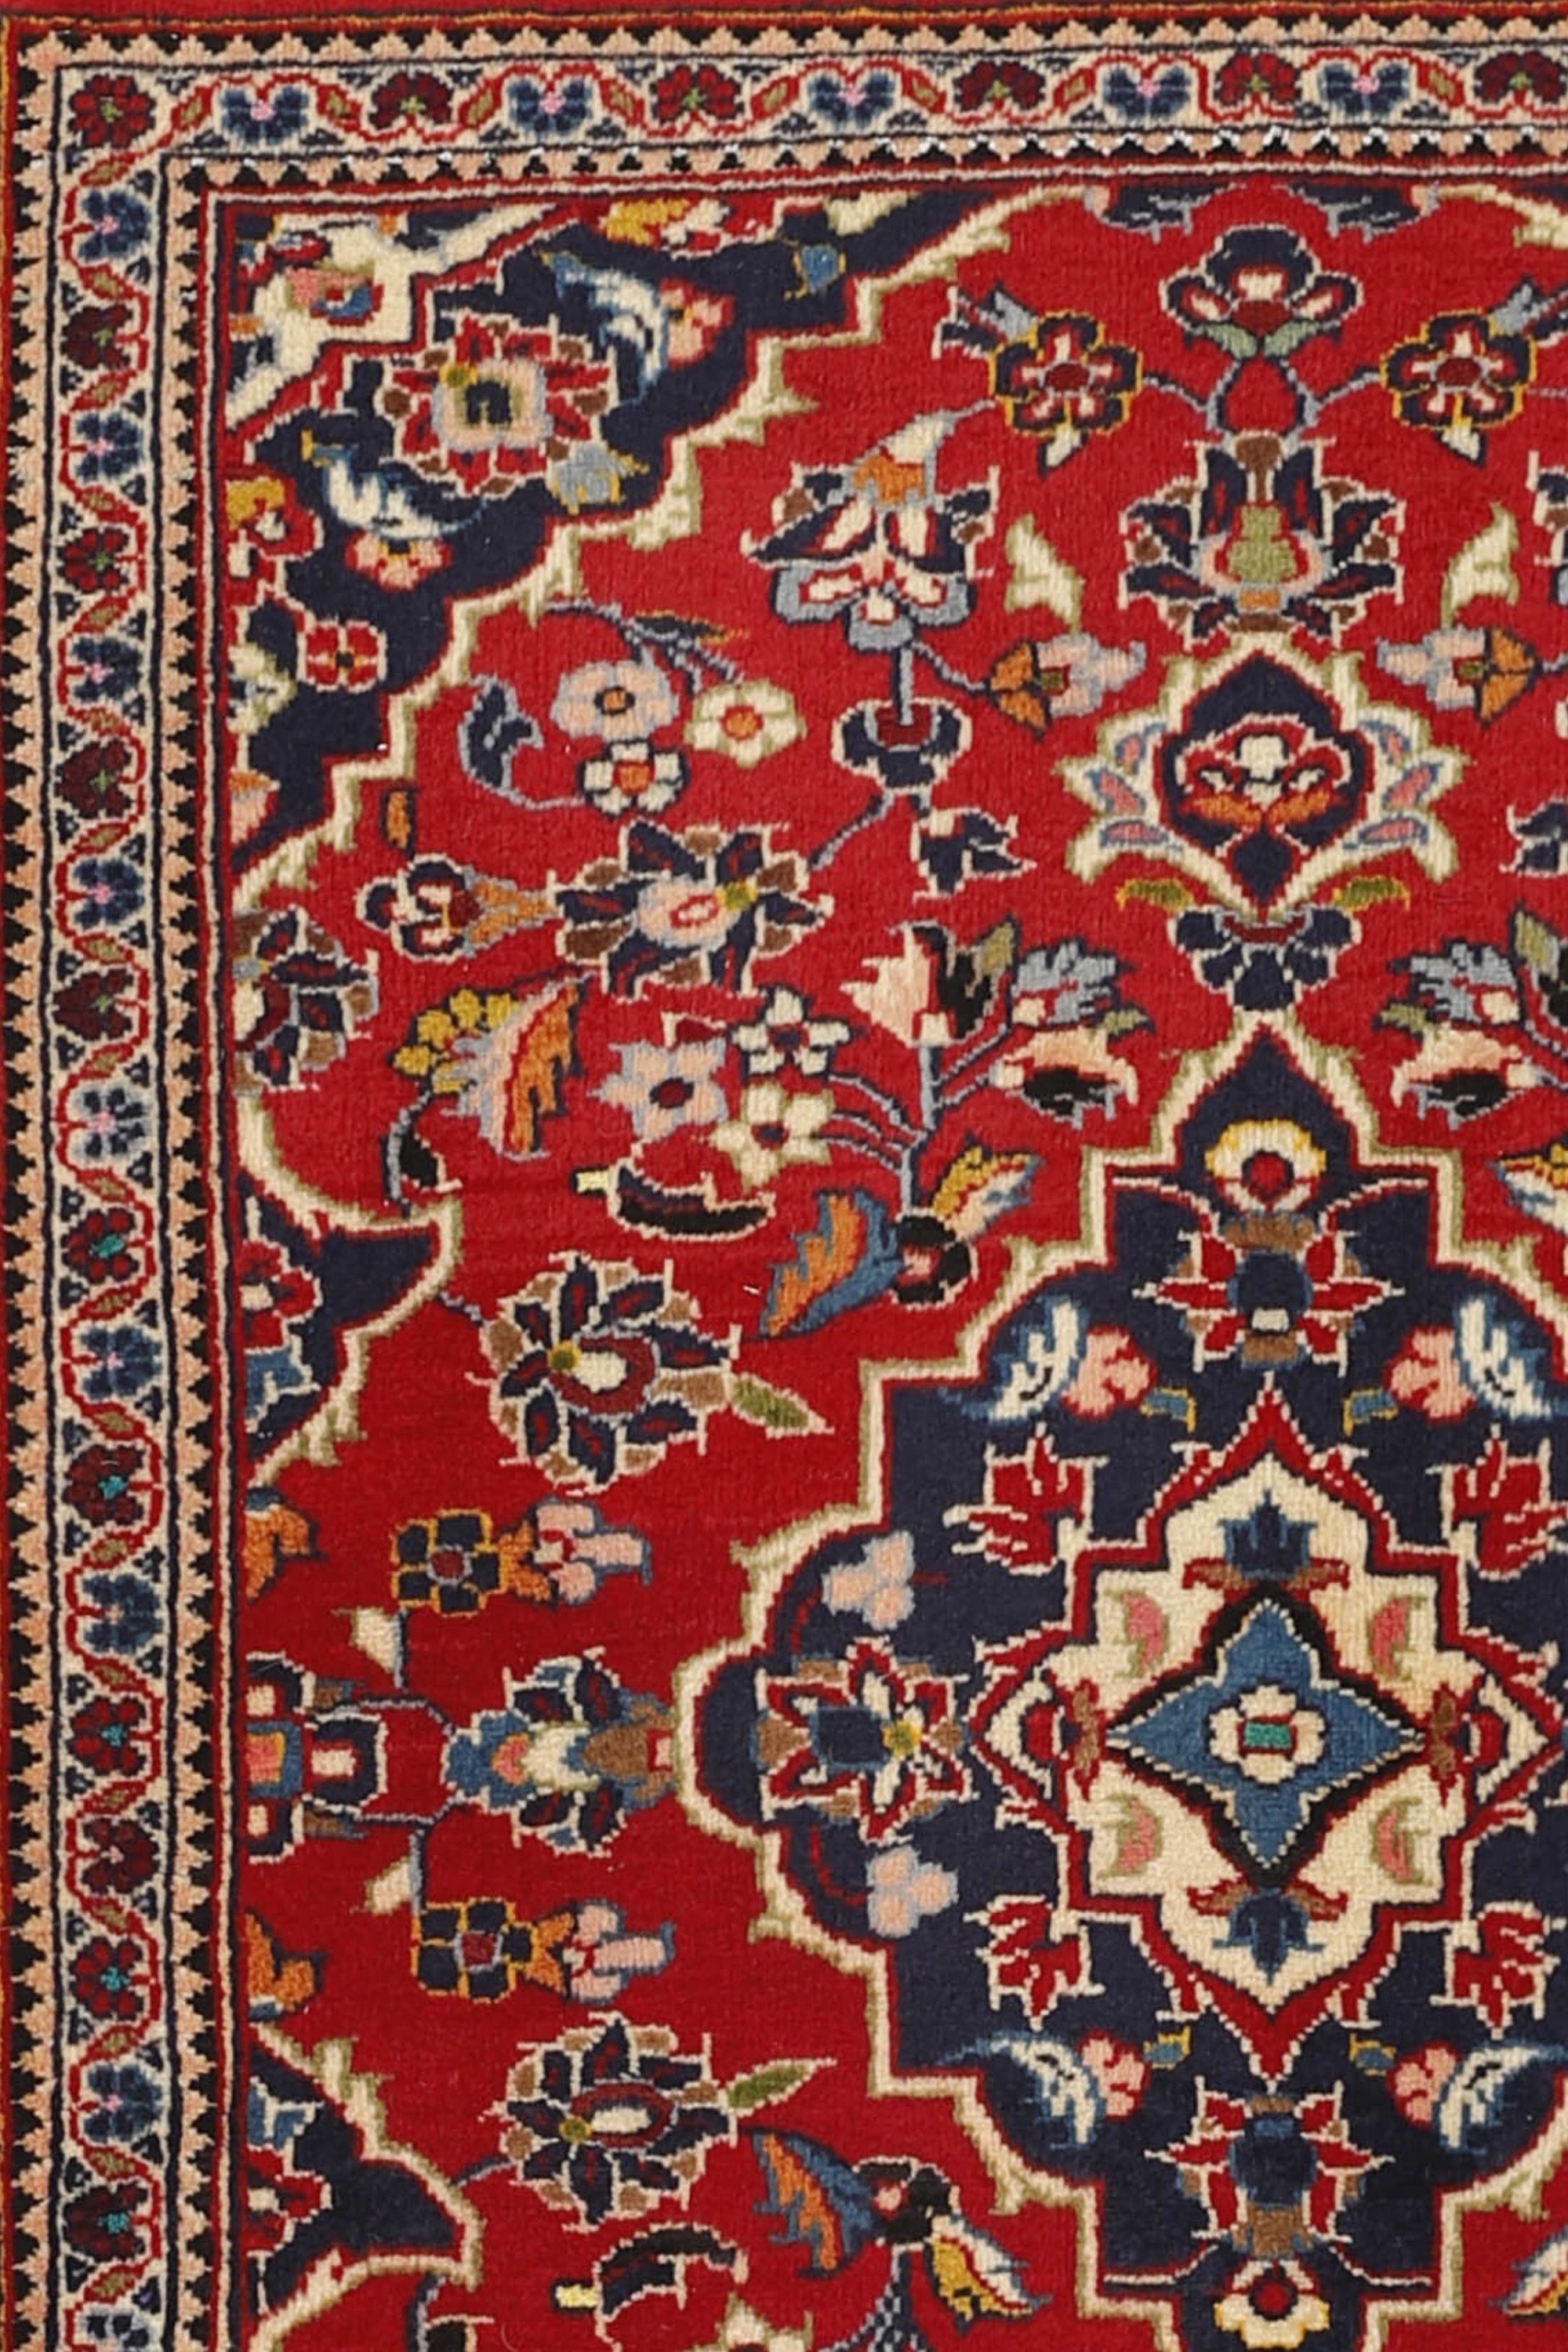 Traditional bordered Keshan rug with red background